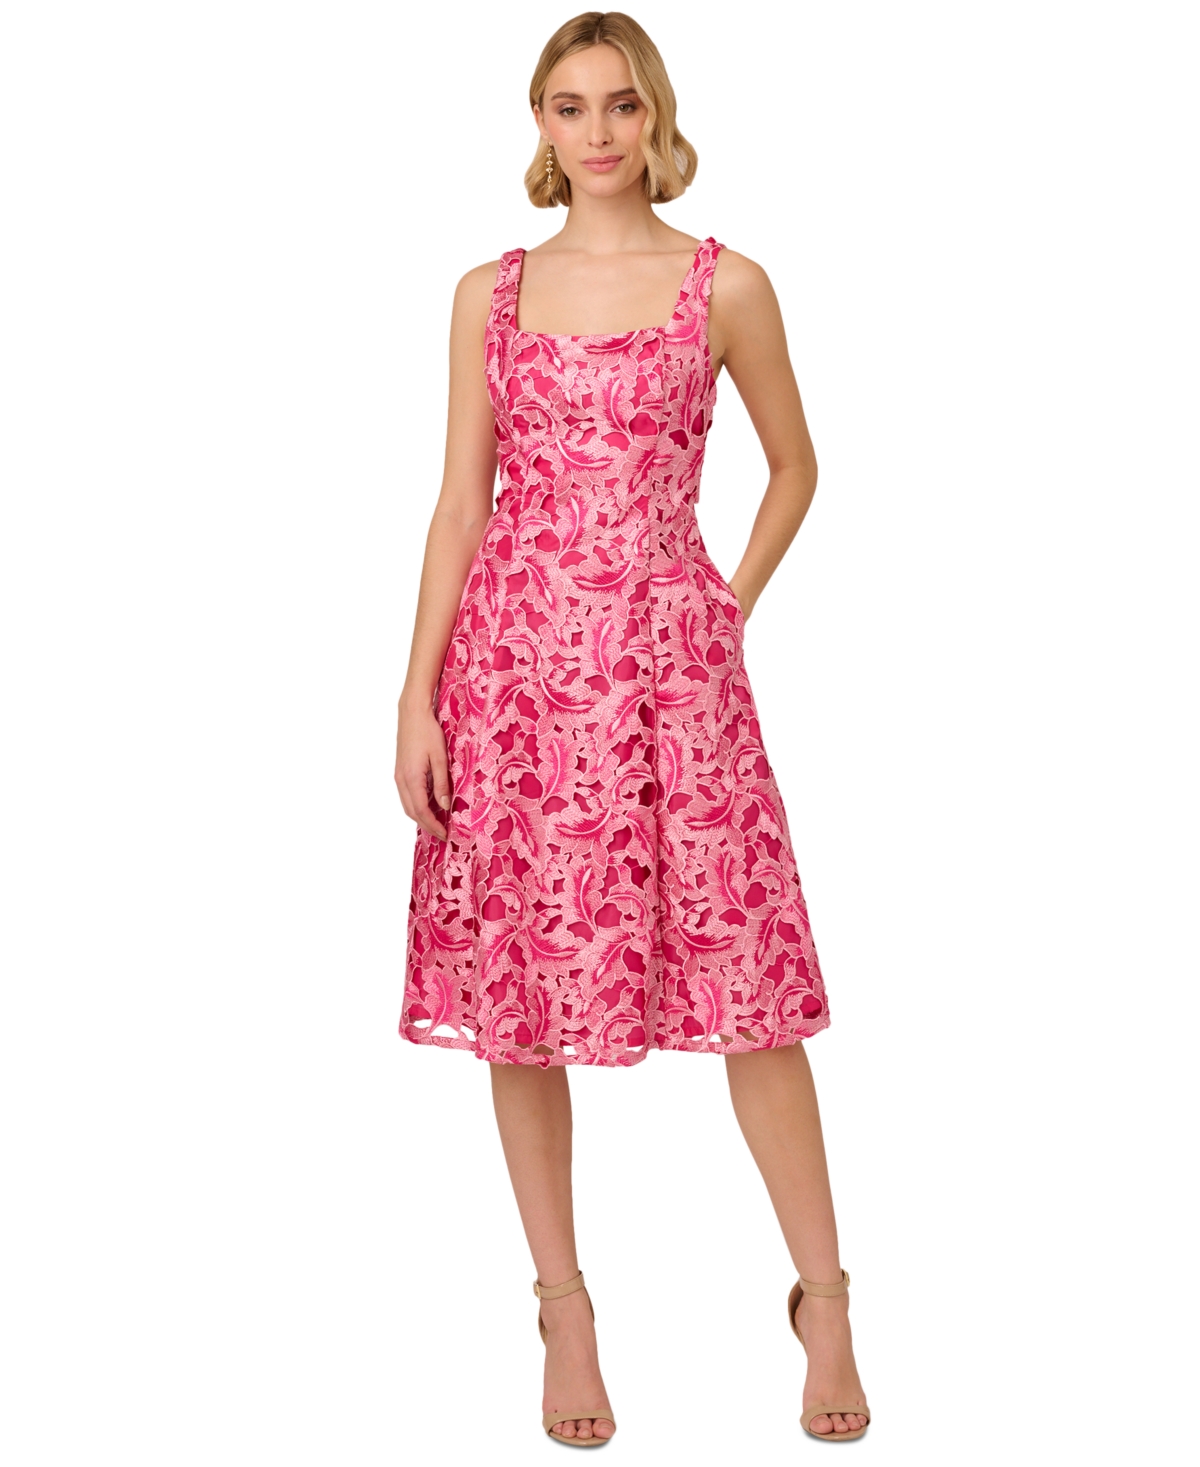 Women's Embroidered Fit & Flare Dress - Electric Pink